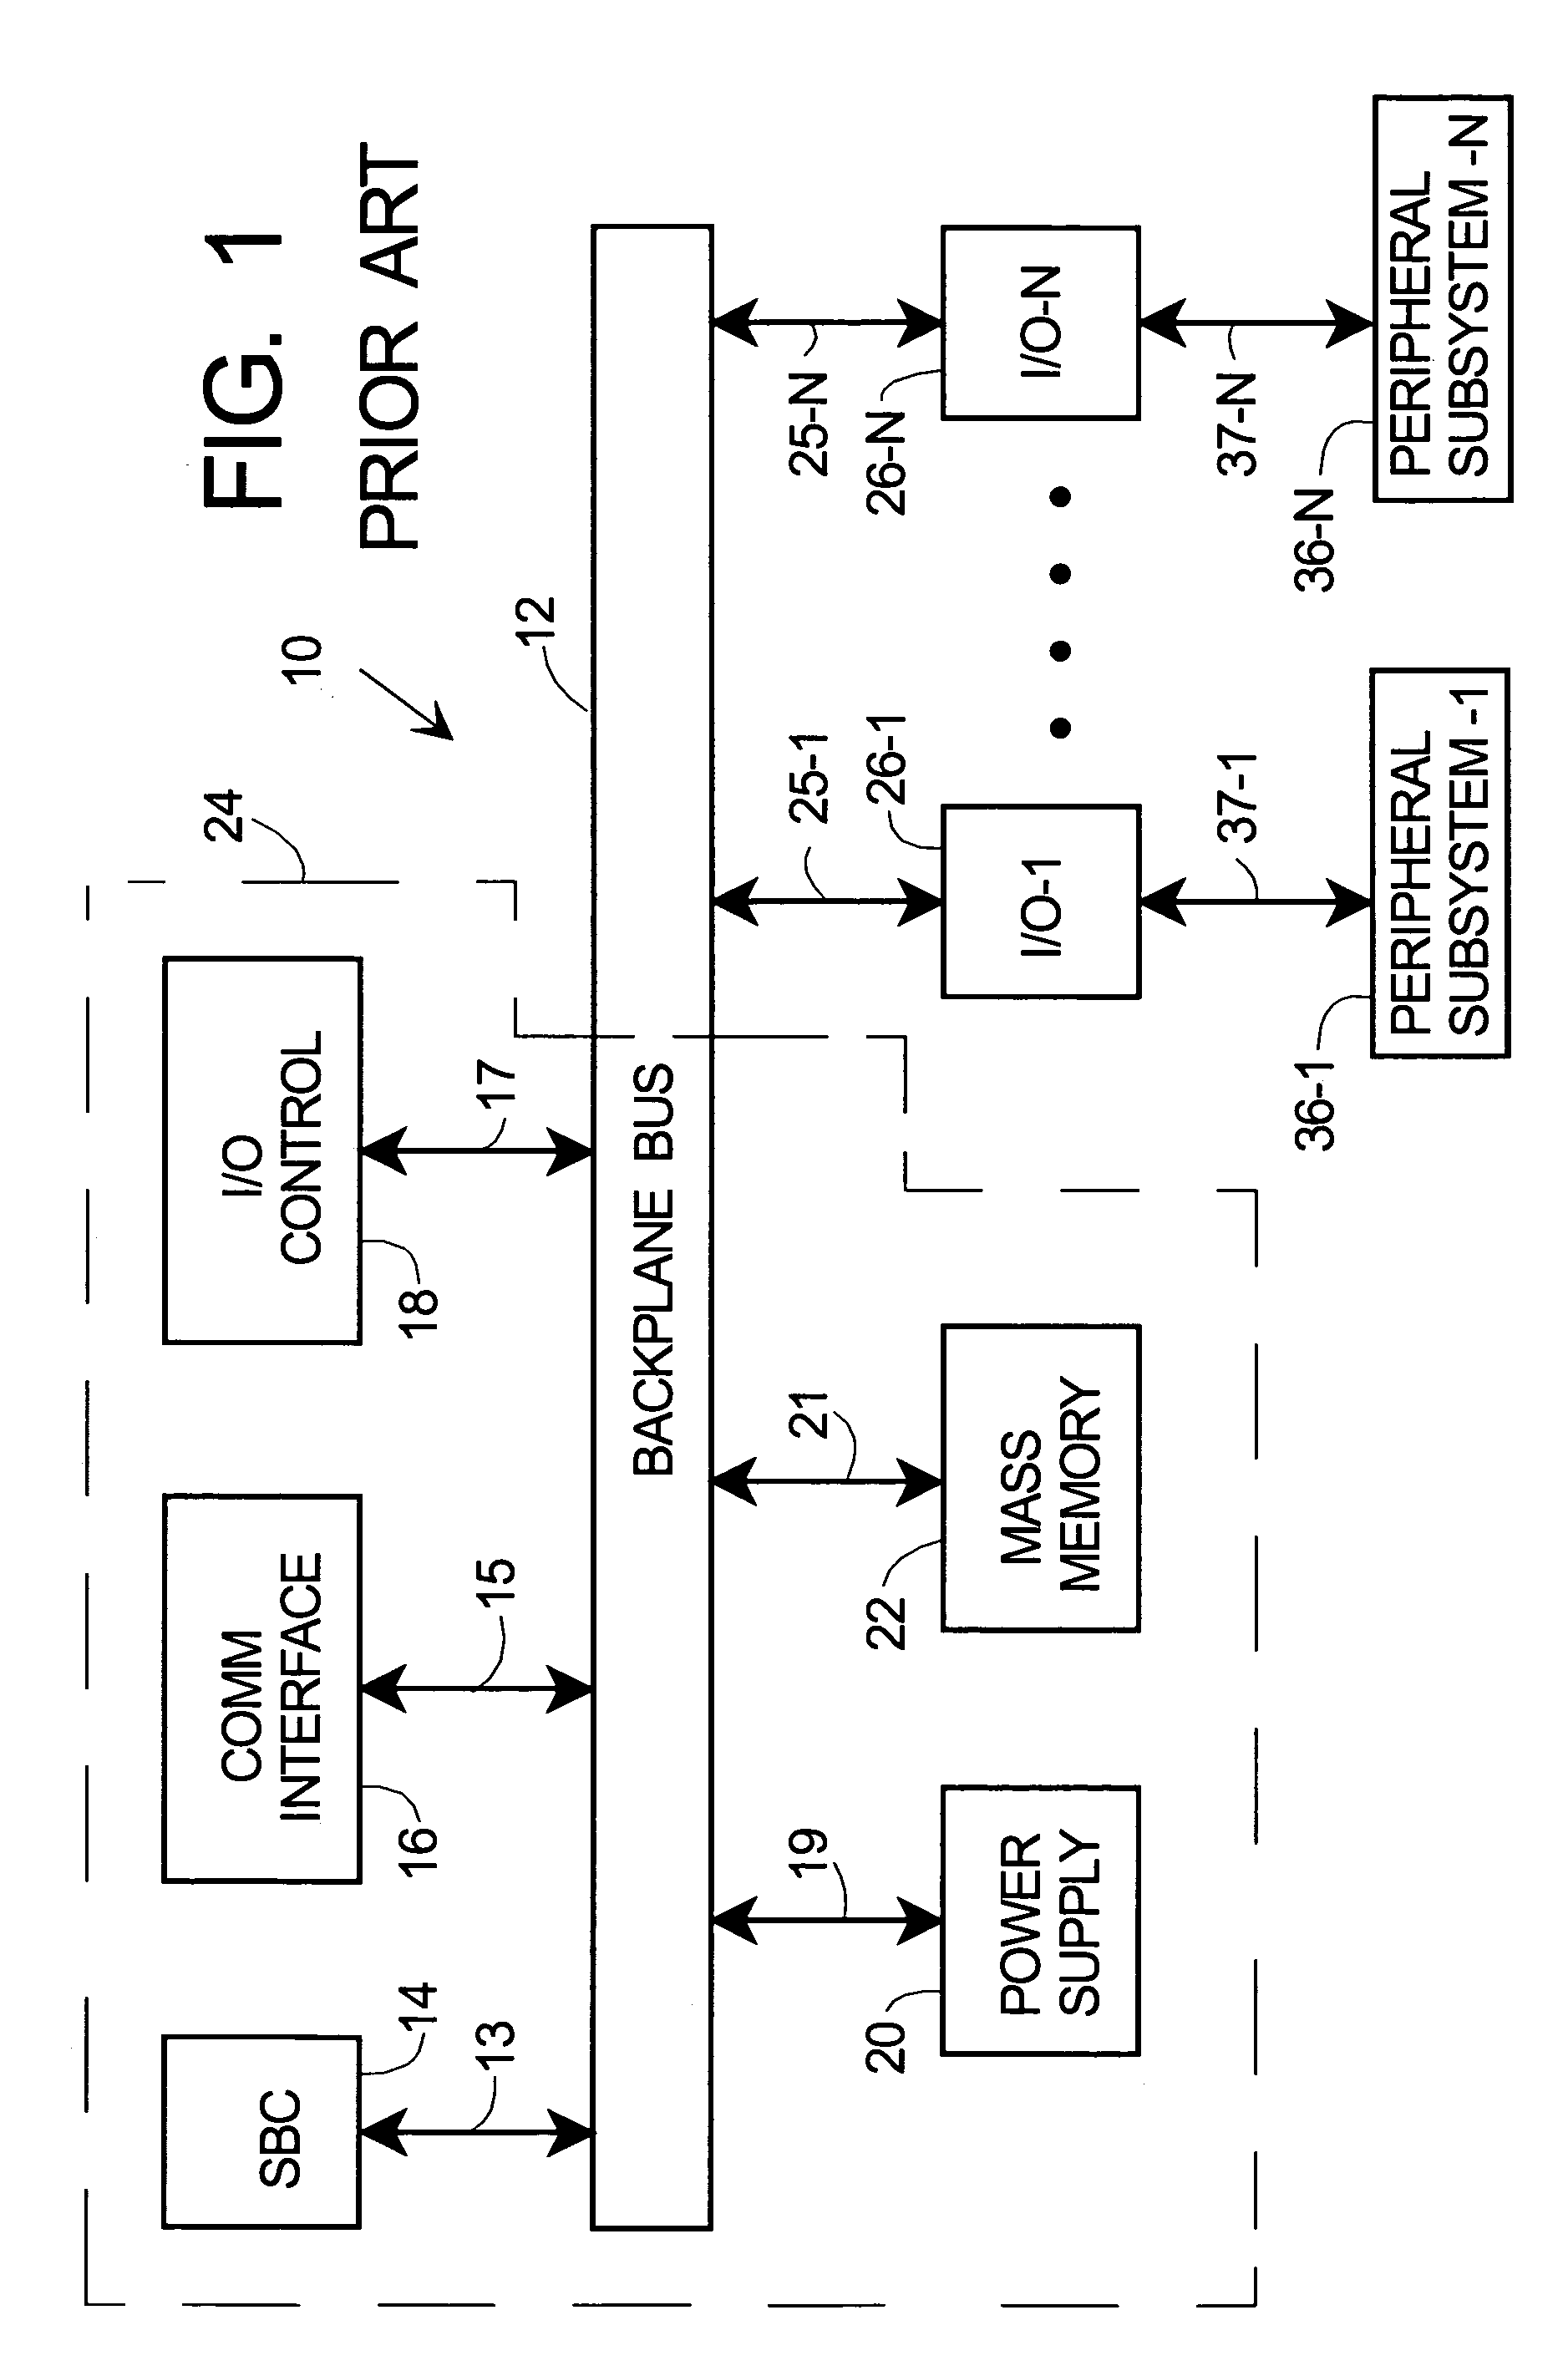 Protective bus interface and method